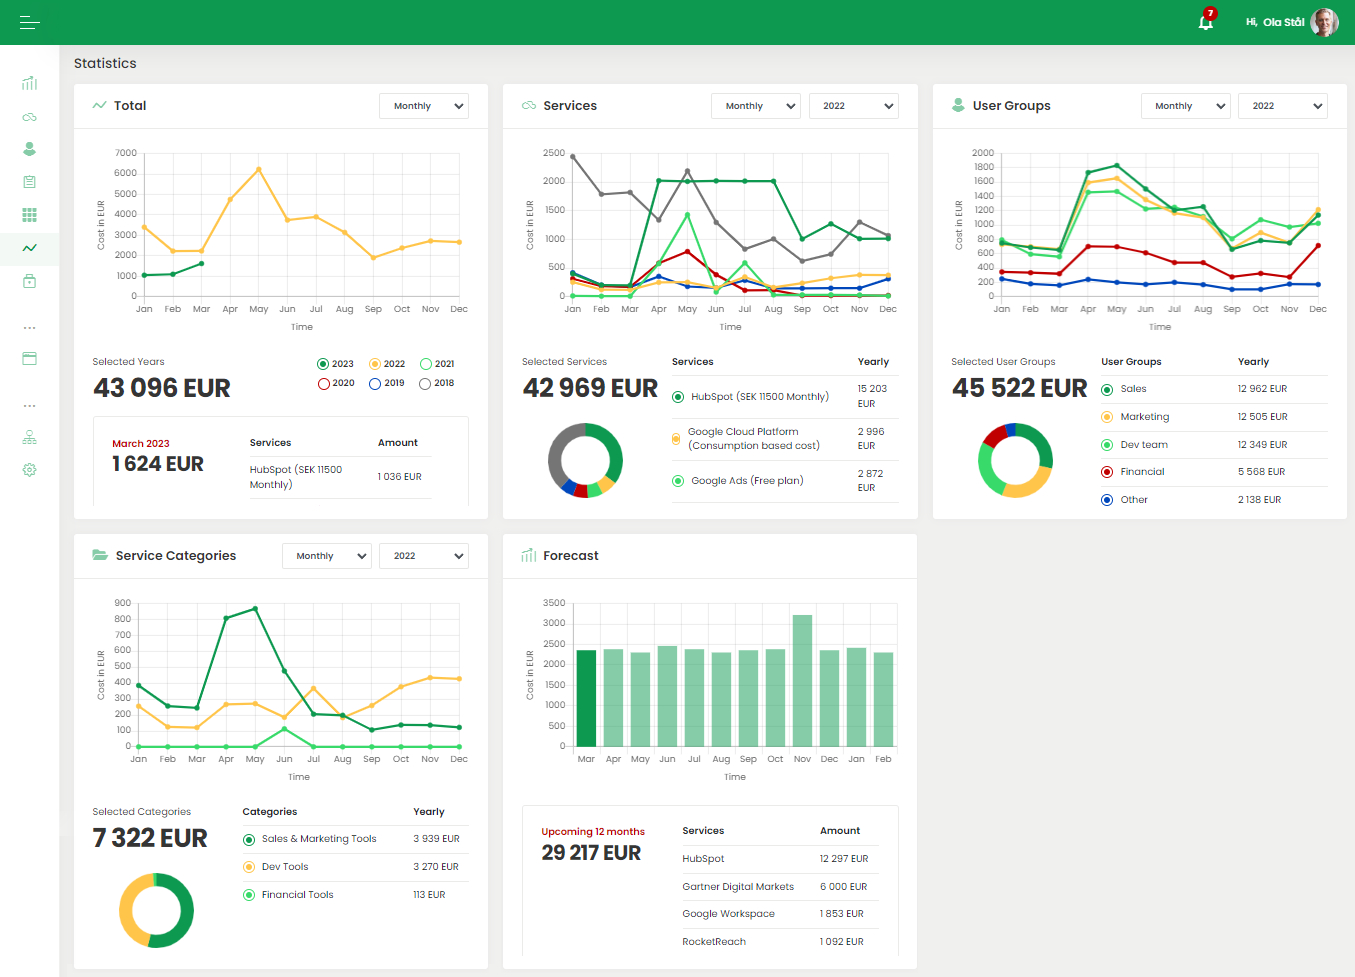 Statistics page; information about how much the company is spending per team or category and how much you are forecasted to spend the next 12 months. Share it with the management team to make more data-driven decisions